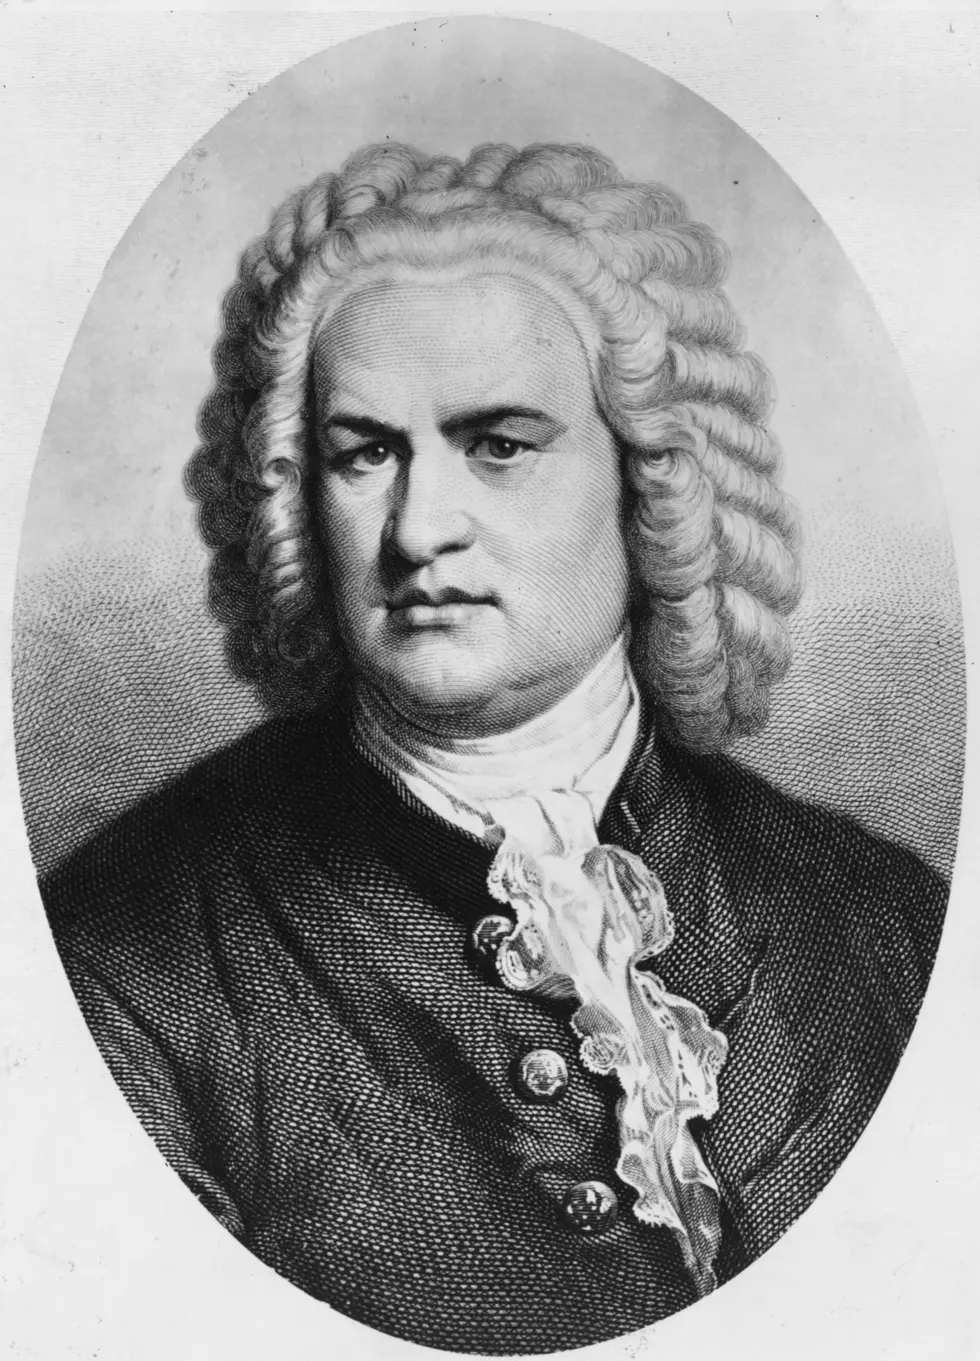 It’s Bach To The Future! Thursday is Bachtoberfest at Bell’s